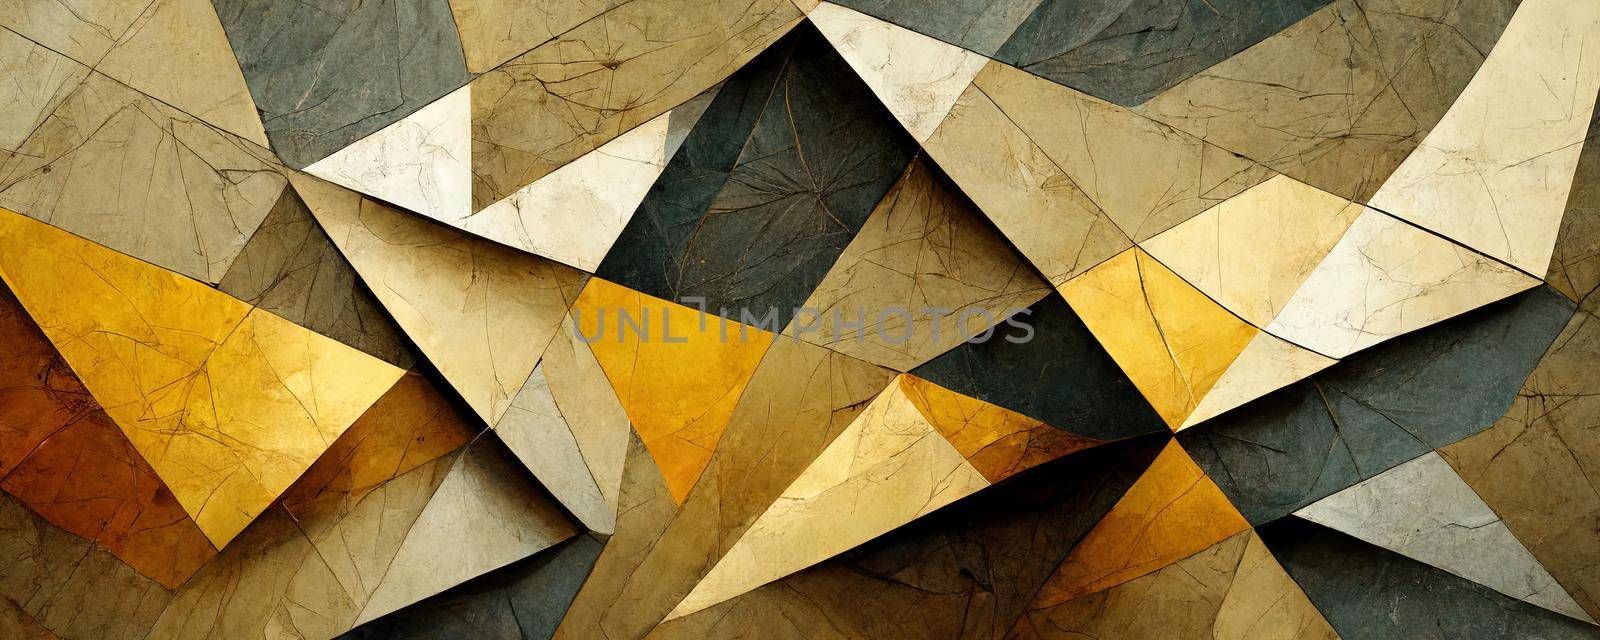 Lux conceptual texture from golden polygons.